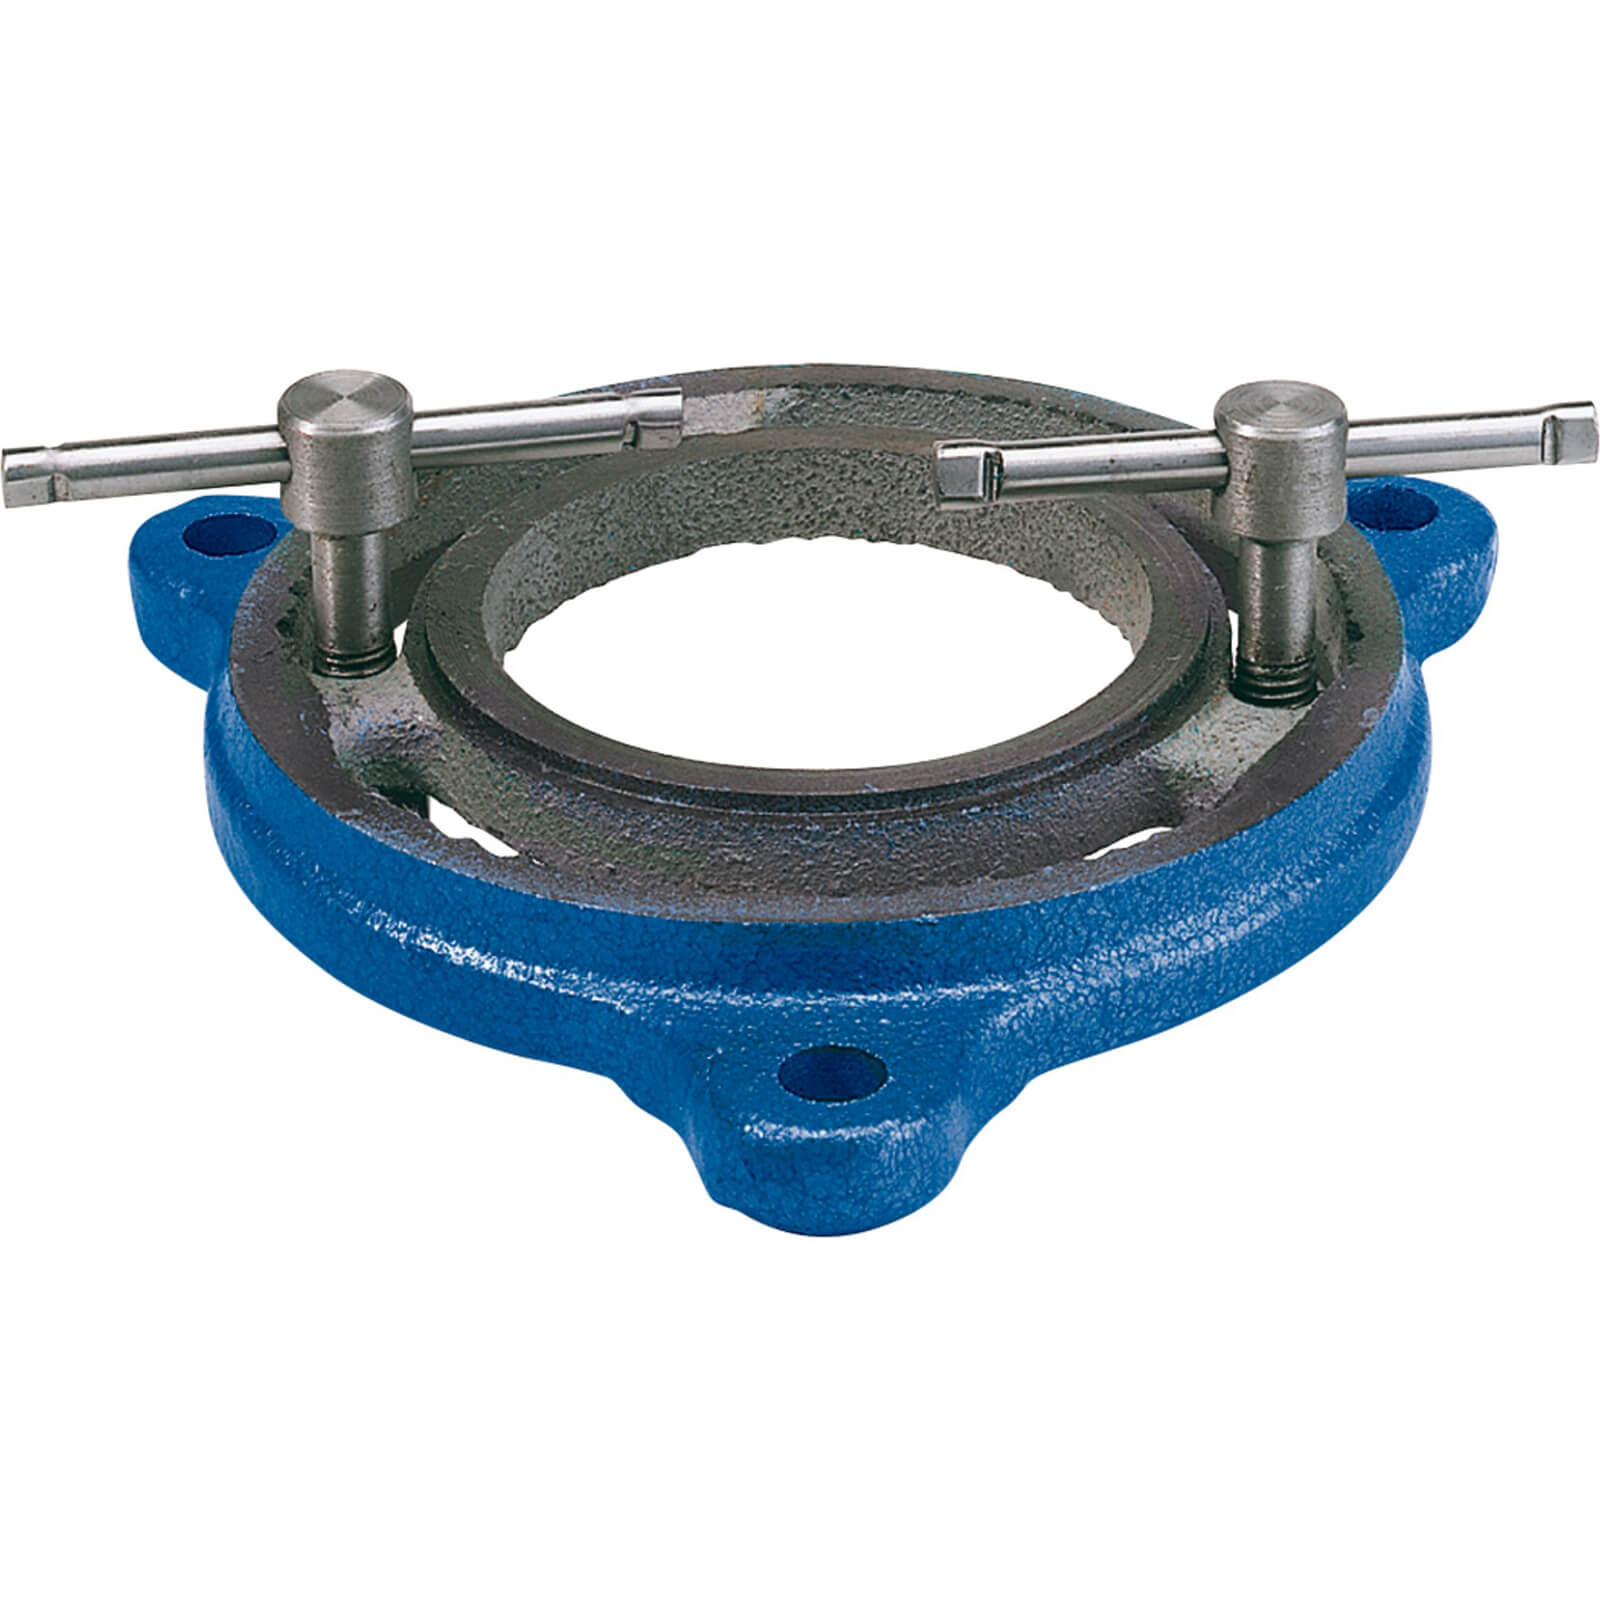 Image of Draper Swivel Base for 45783 Engineers Bench Vice